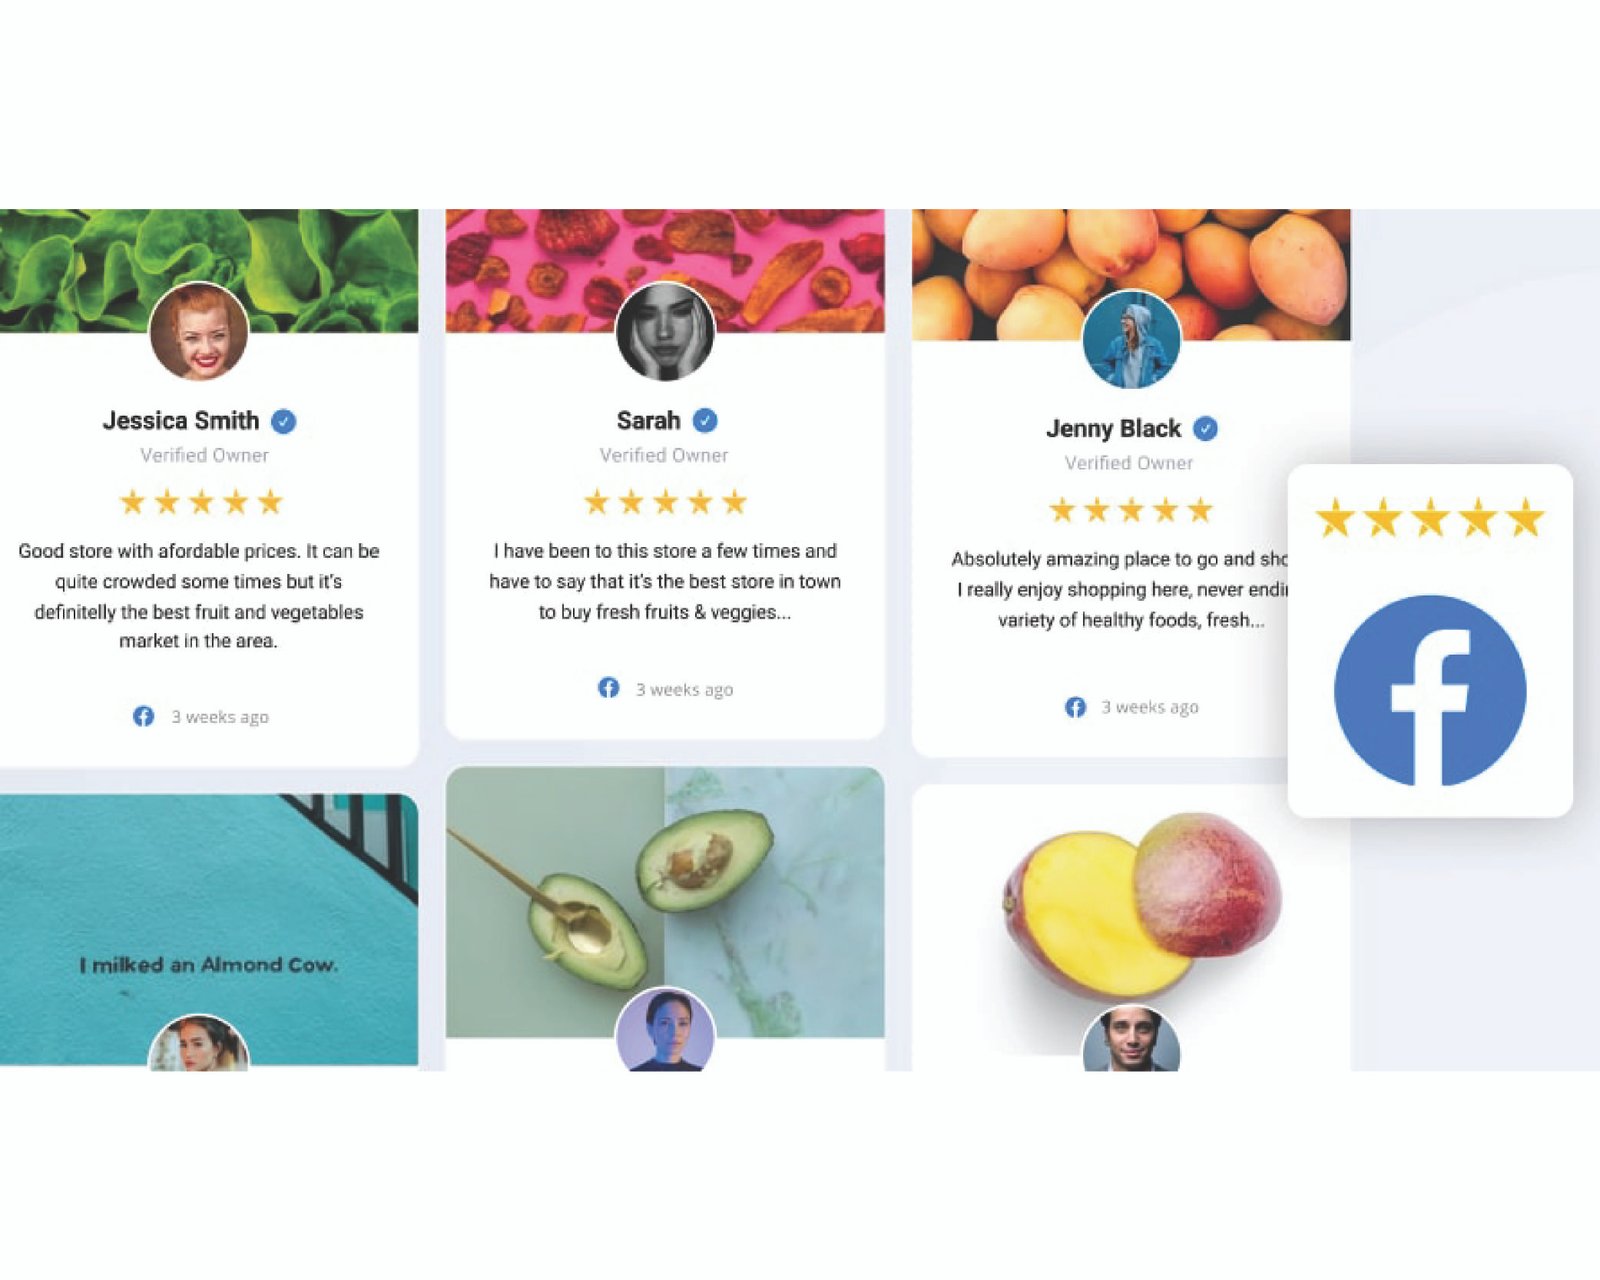 Building Trust and Recognition: The Impact of Facebook Reviews